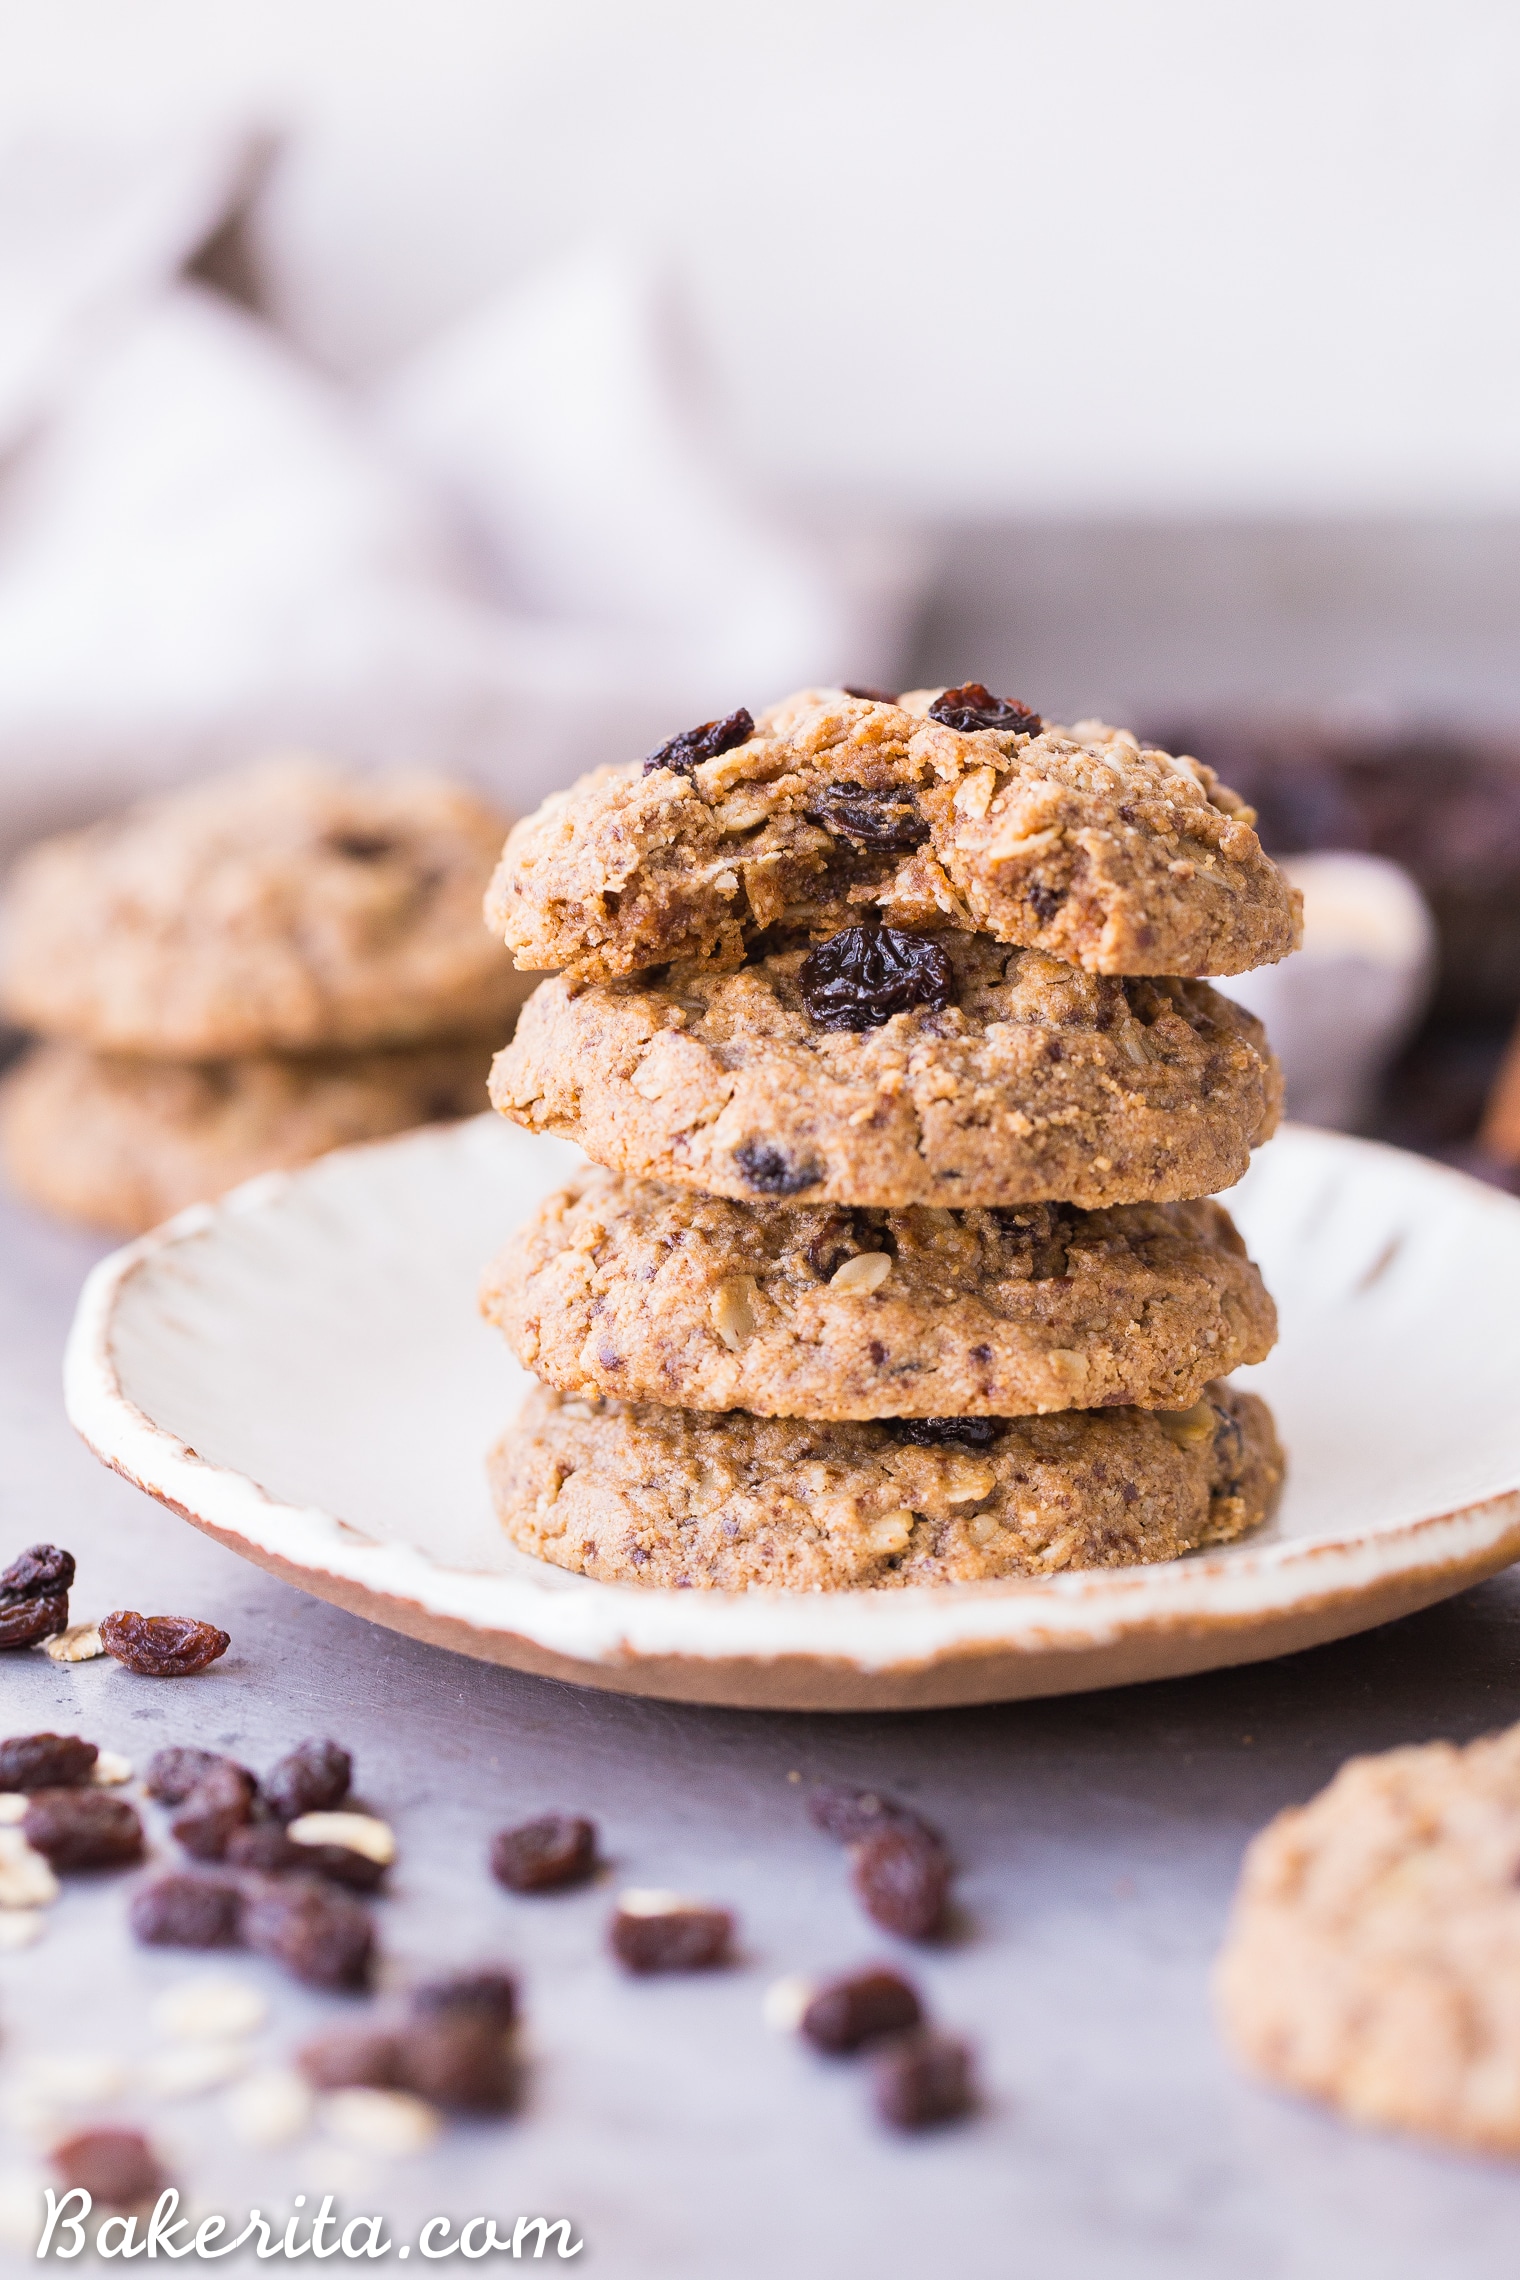 These Peanut Butter Oatmeal Raisin Cookies are the best oatmeal raisin cook...